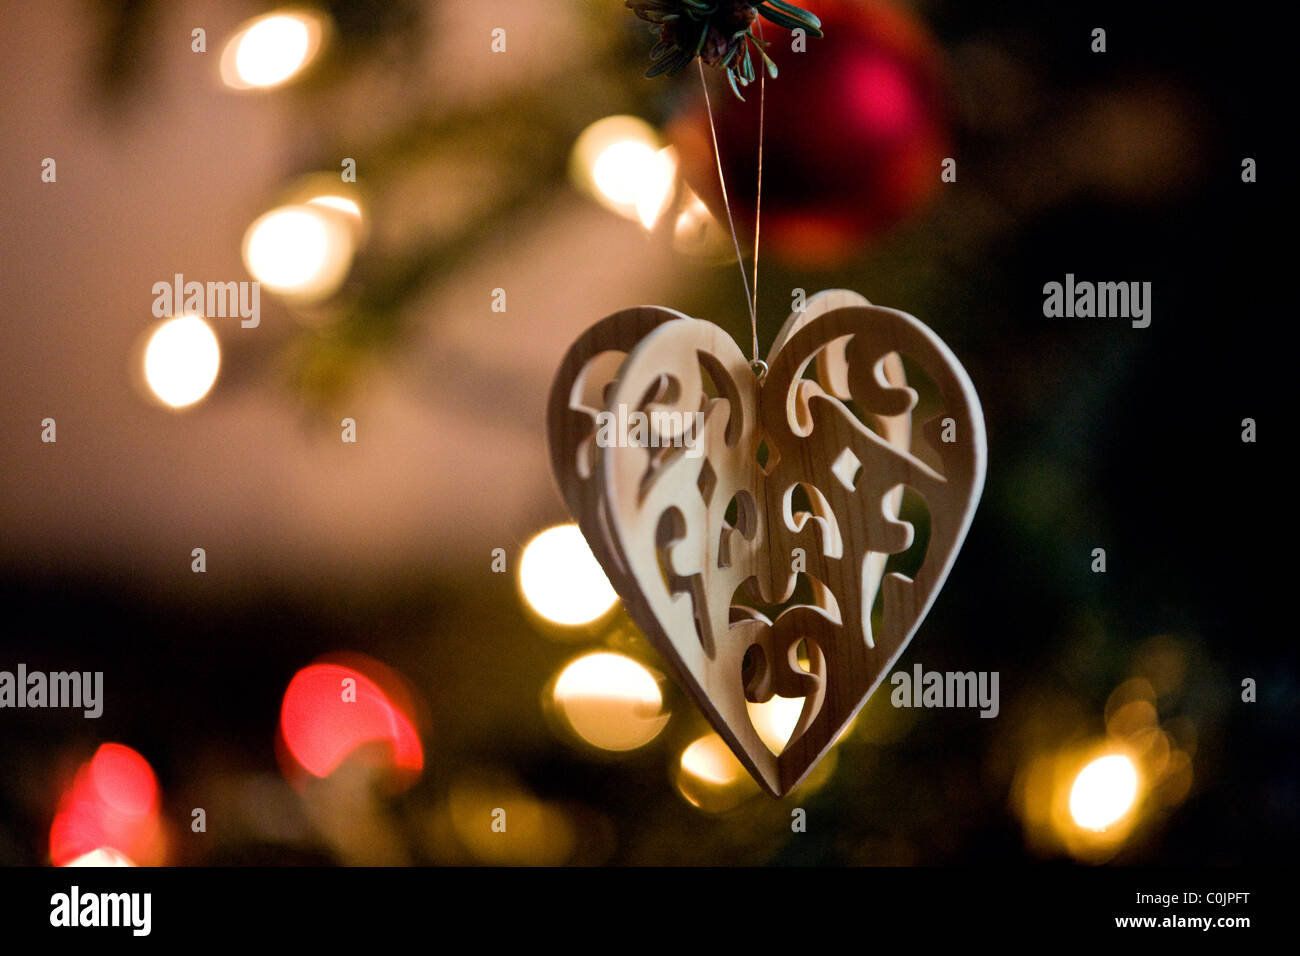 A wooden heart shaped decoration hanging on a Christmas tree Stock Photo